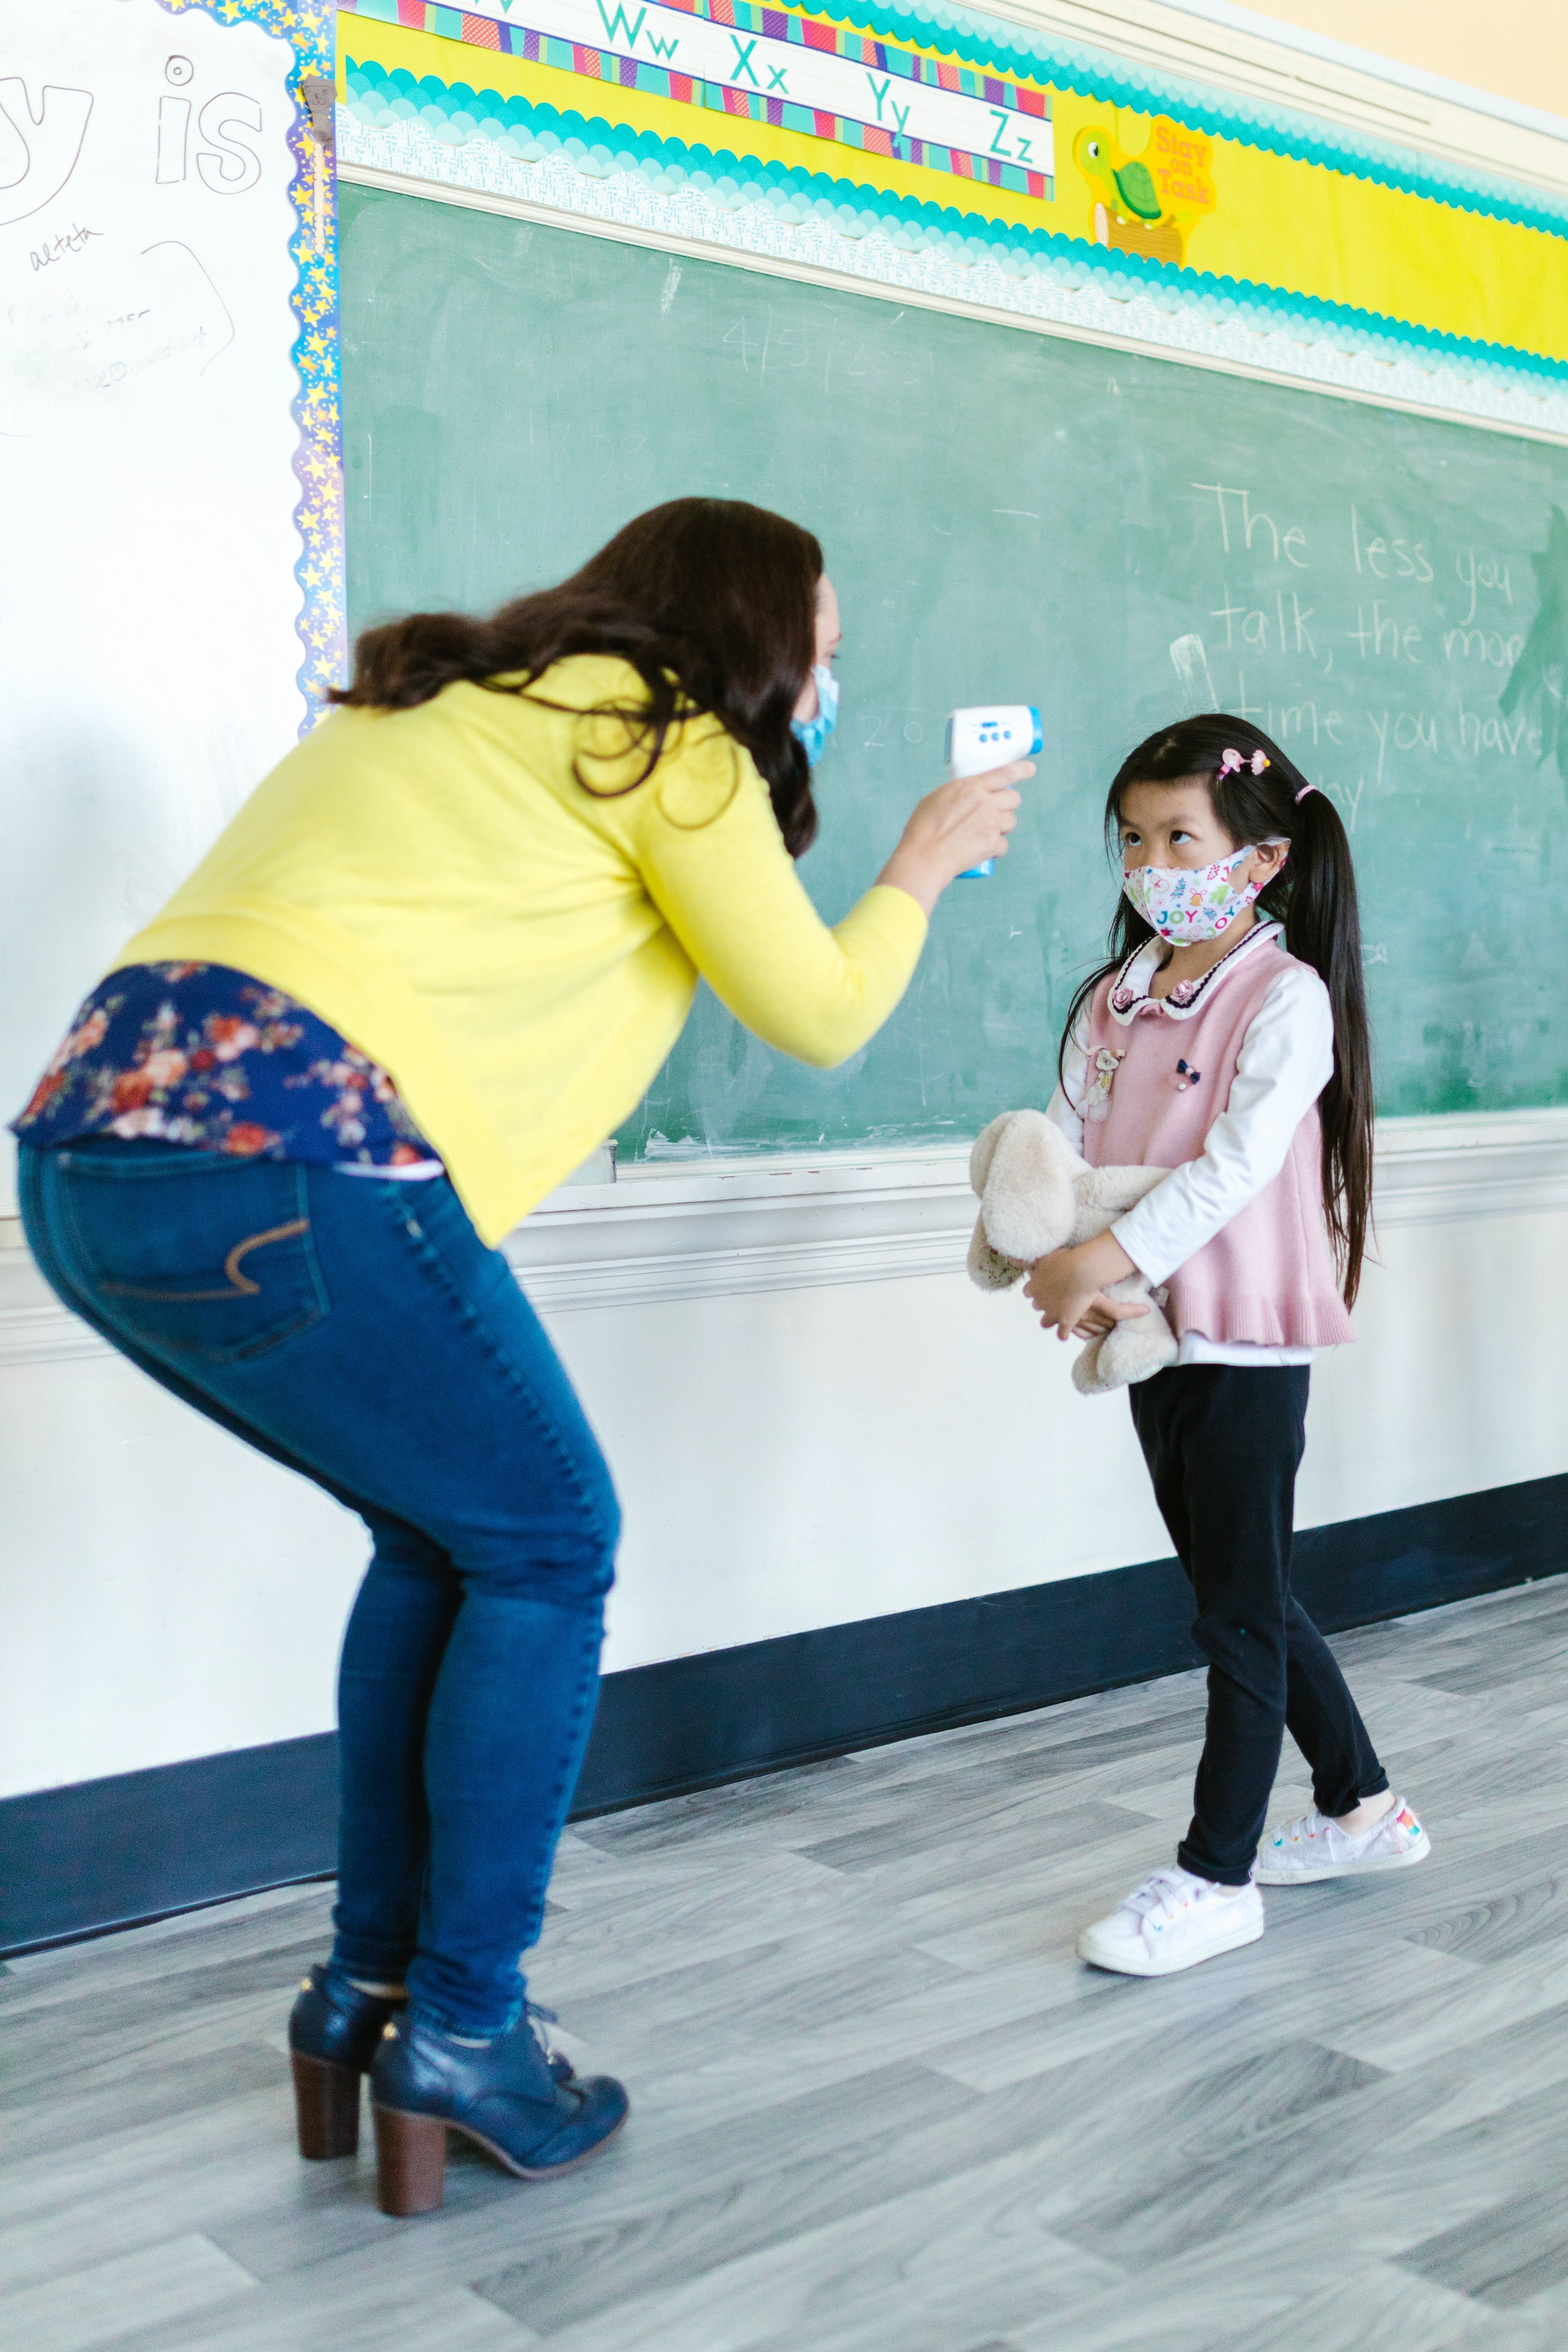 Pedagogue highlights the negative effects of closing schools amid the pandemic (Photo: Pexels)